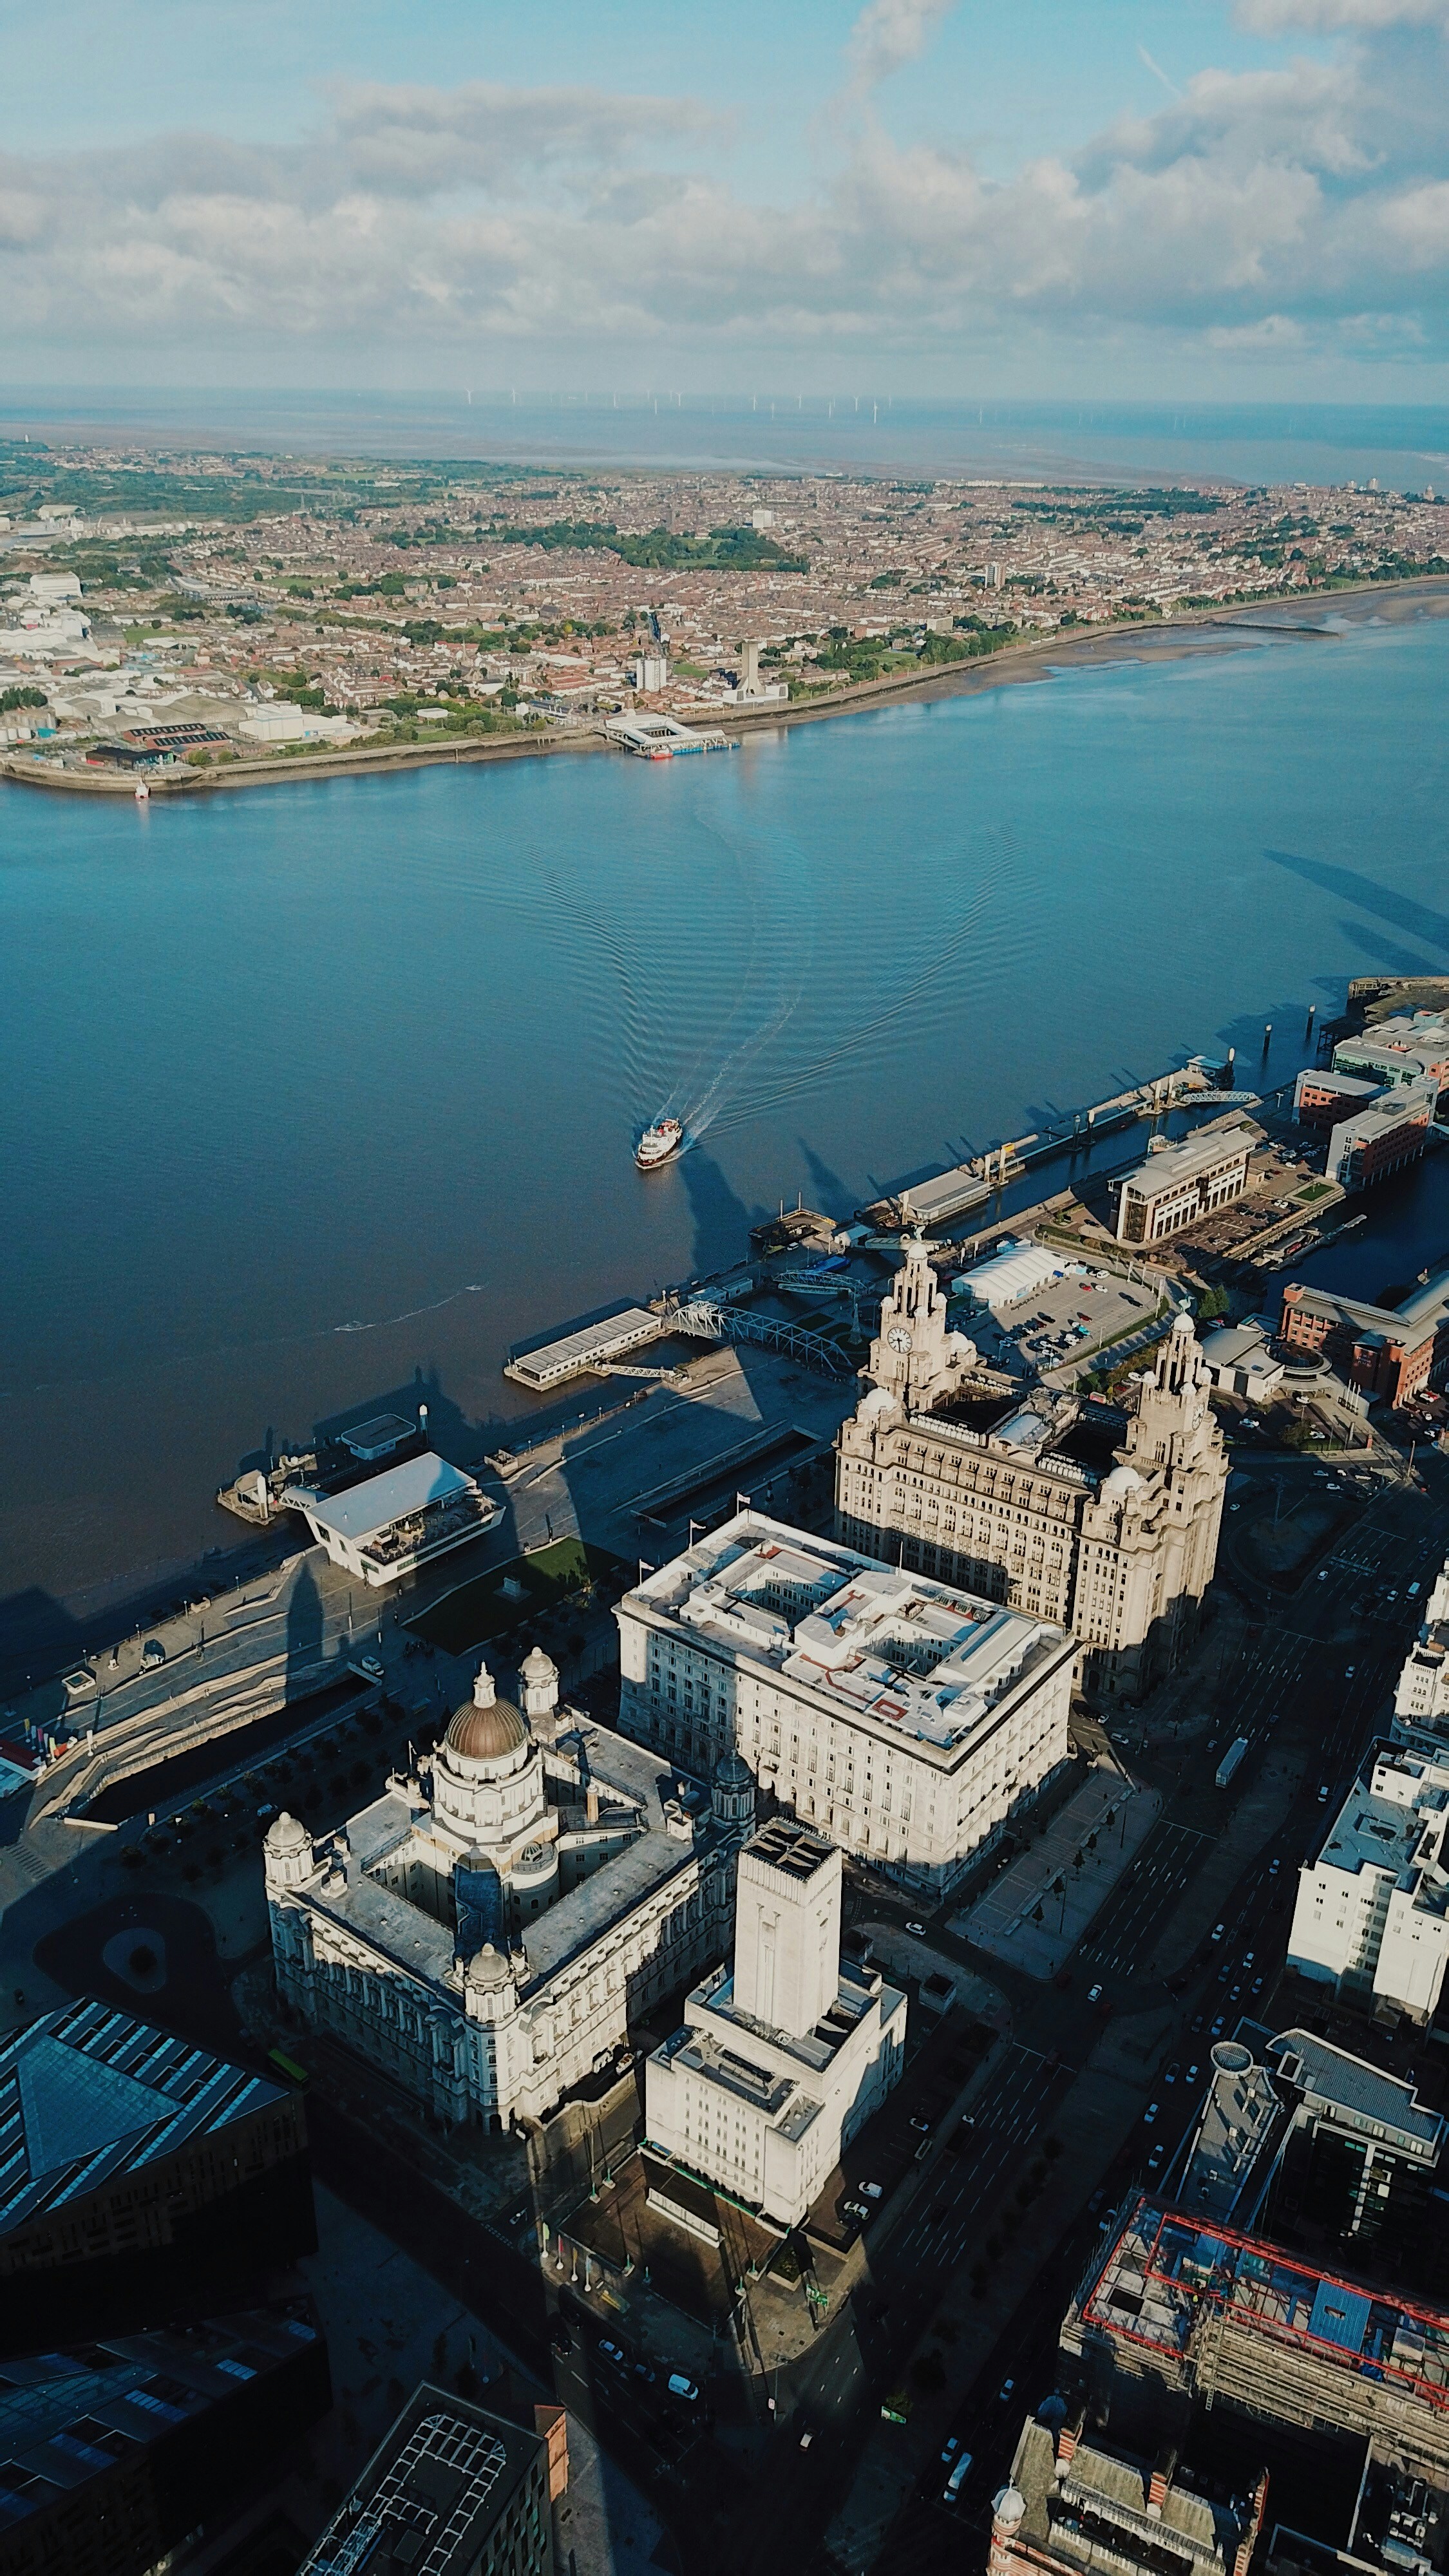 An aerial drone photo showing the River Mersey and a ferry boat crossing it, in the photo you can see both sides of the Mersey which are the city of Liverpool and the Wirral peninsula. Photo taken with a DJI Mavic Pro Drone